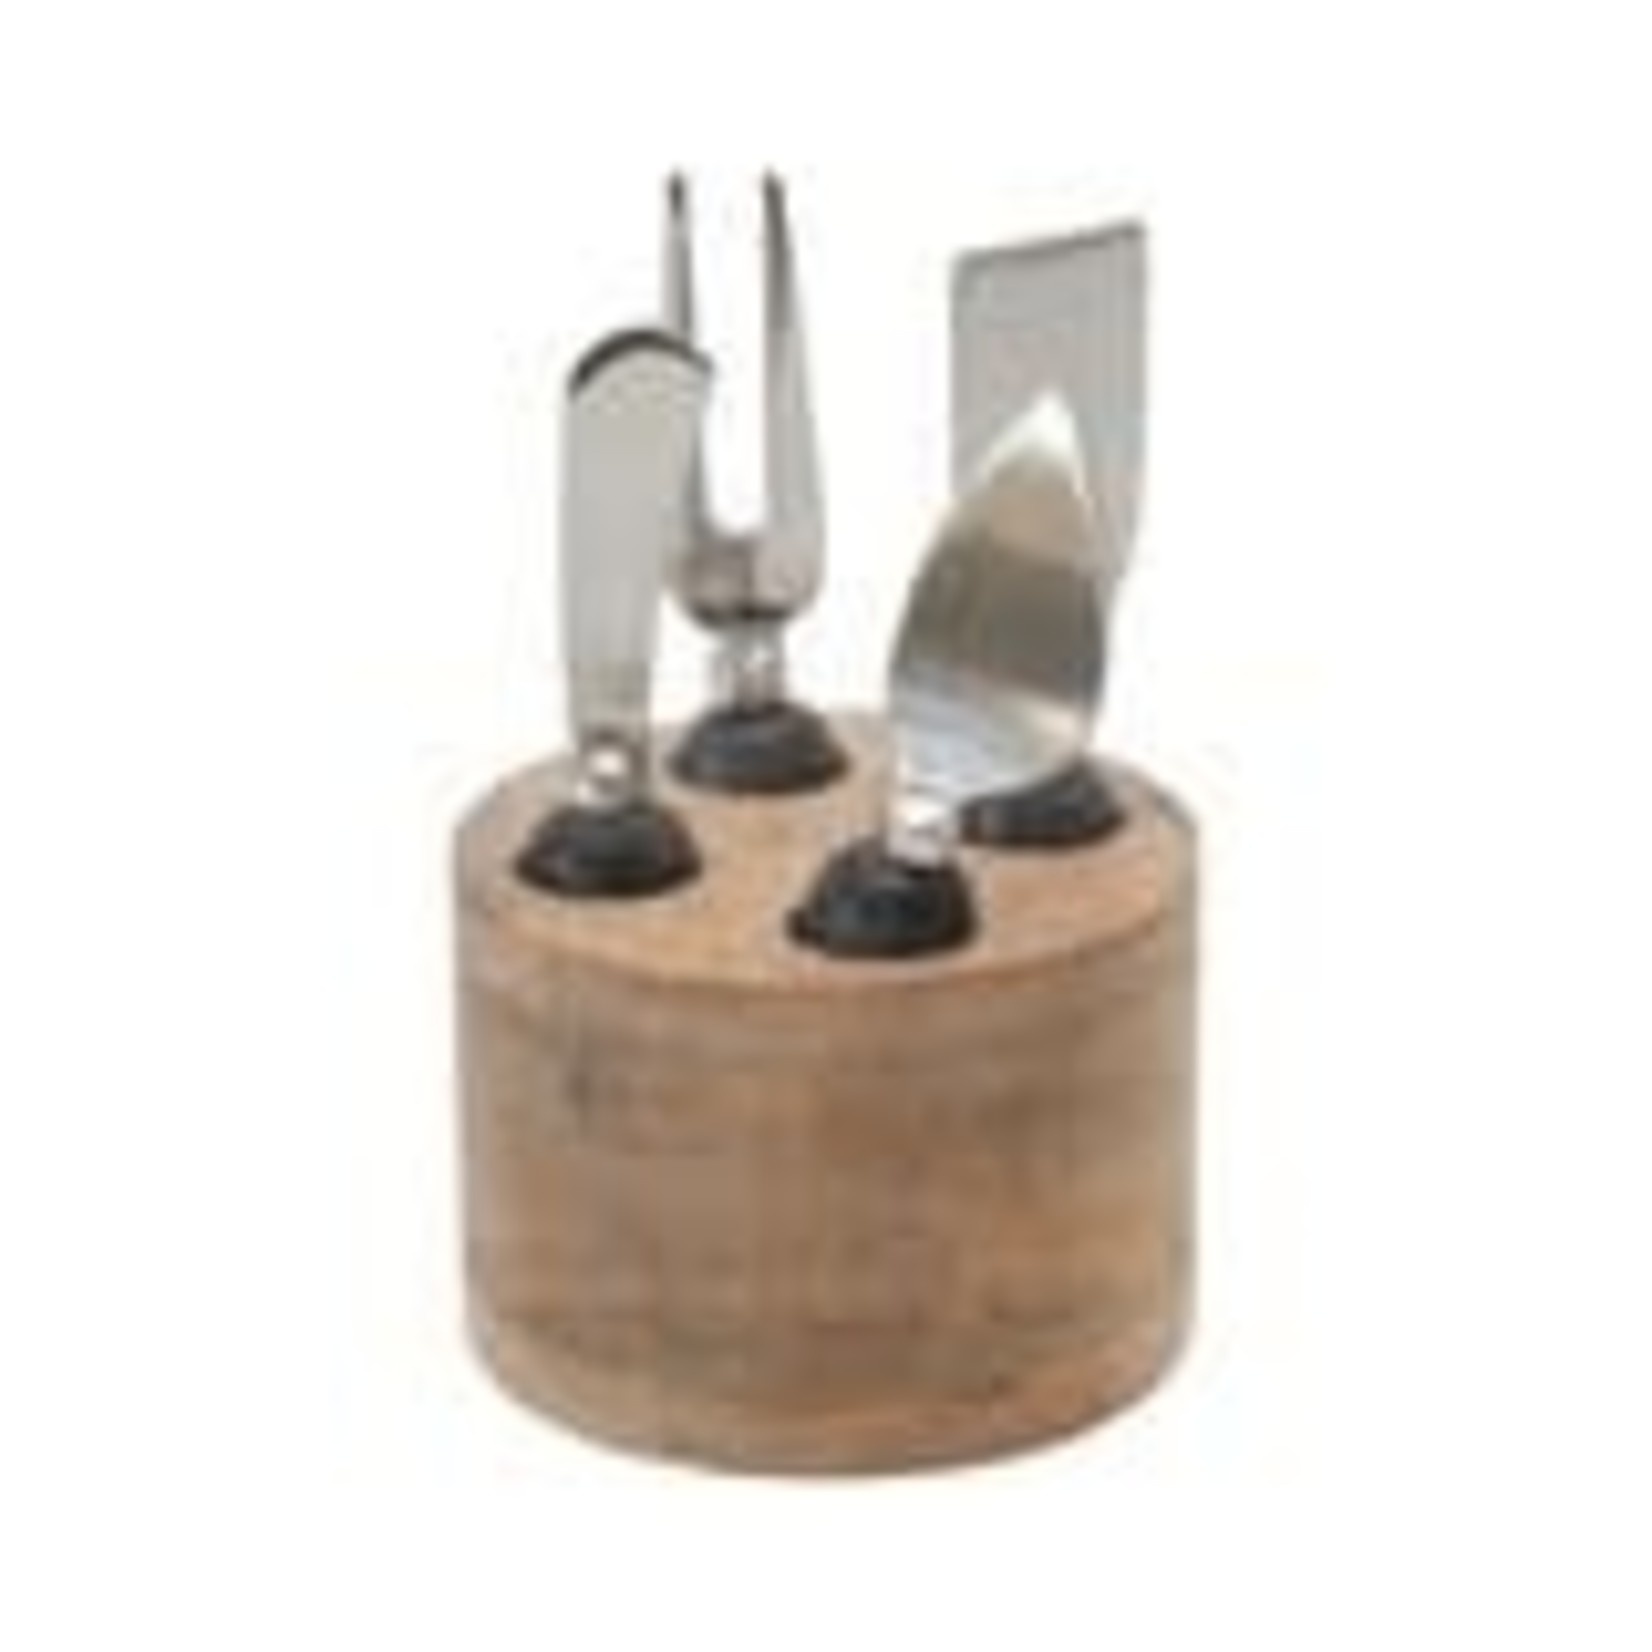 CREATIVE COOP CHEESE SERVERS W/ WOOD STAND S/5